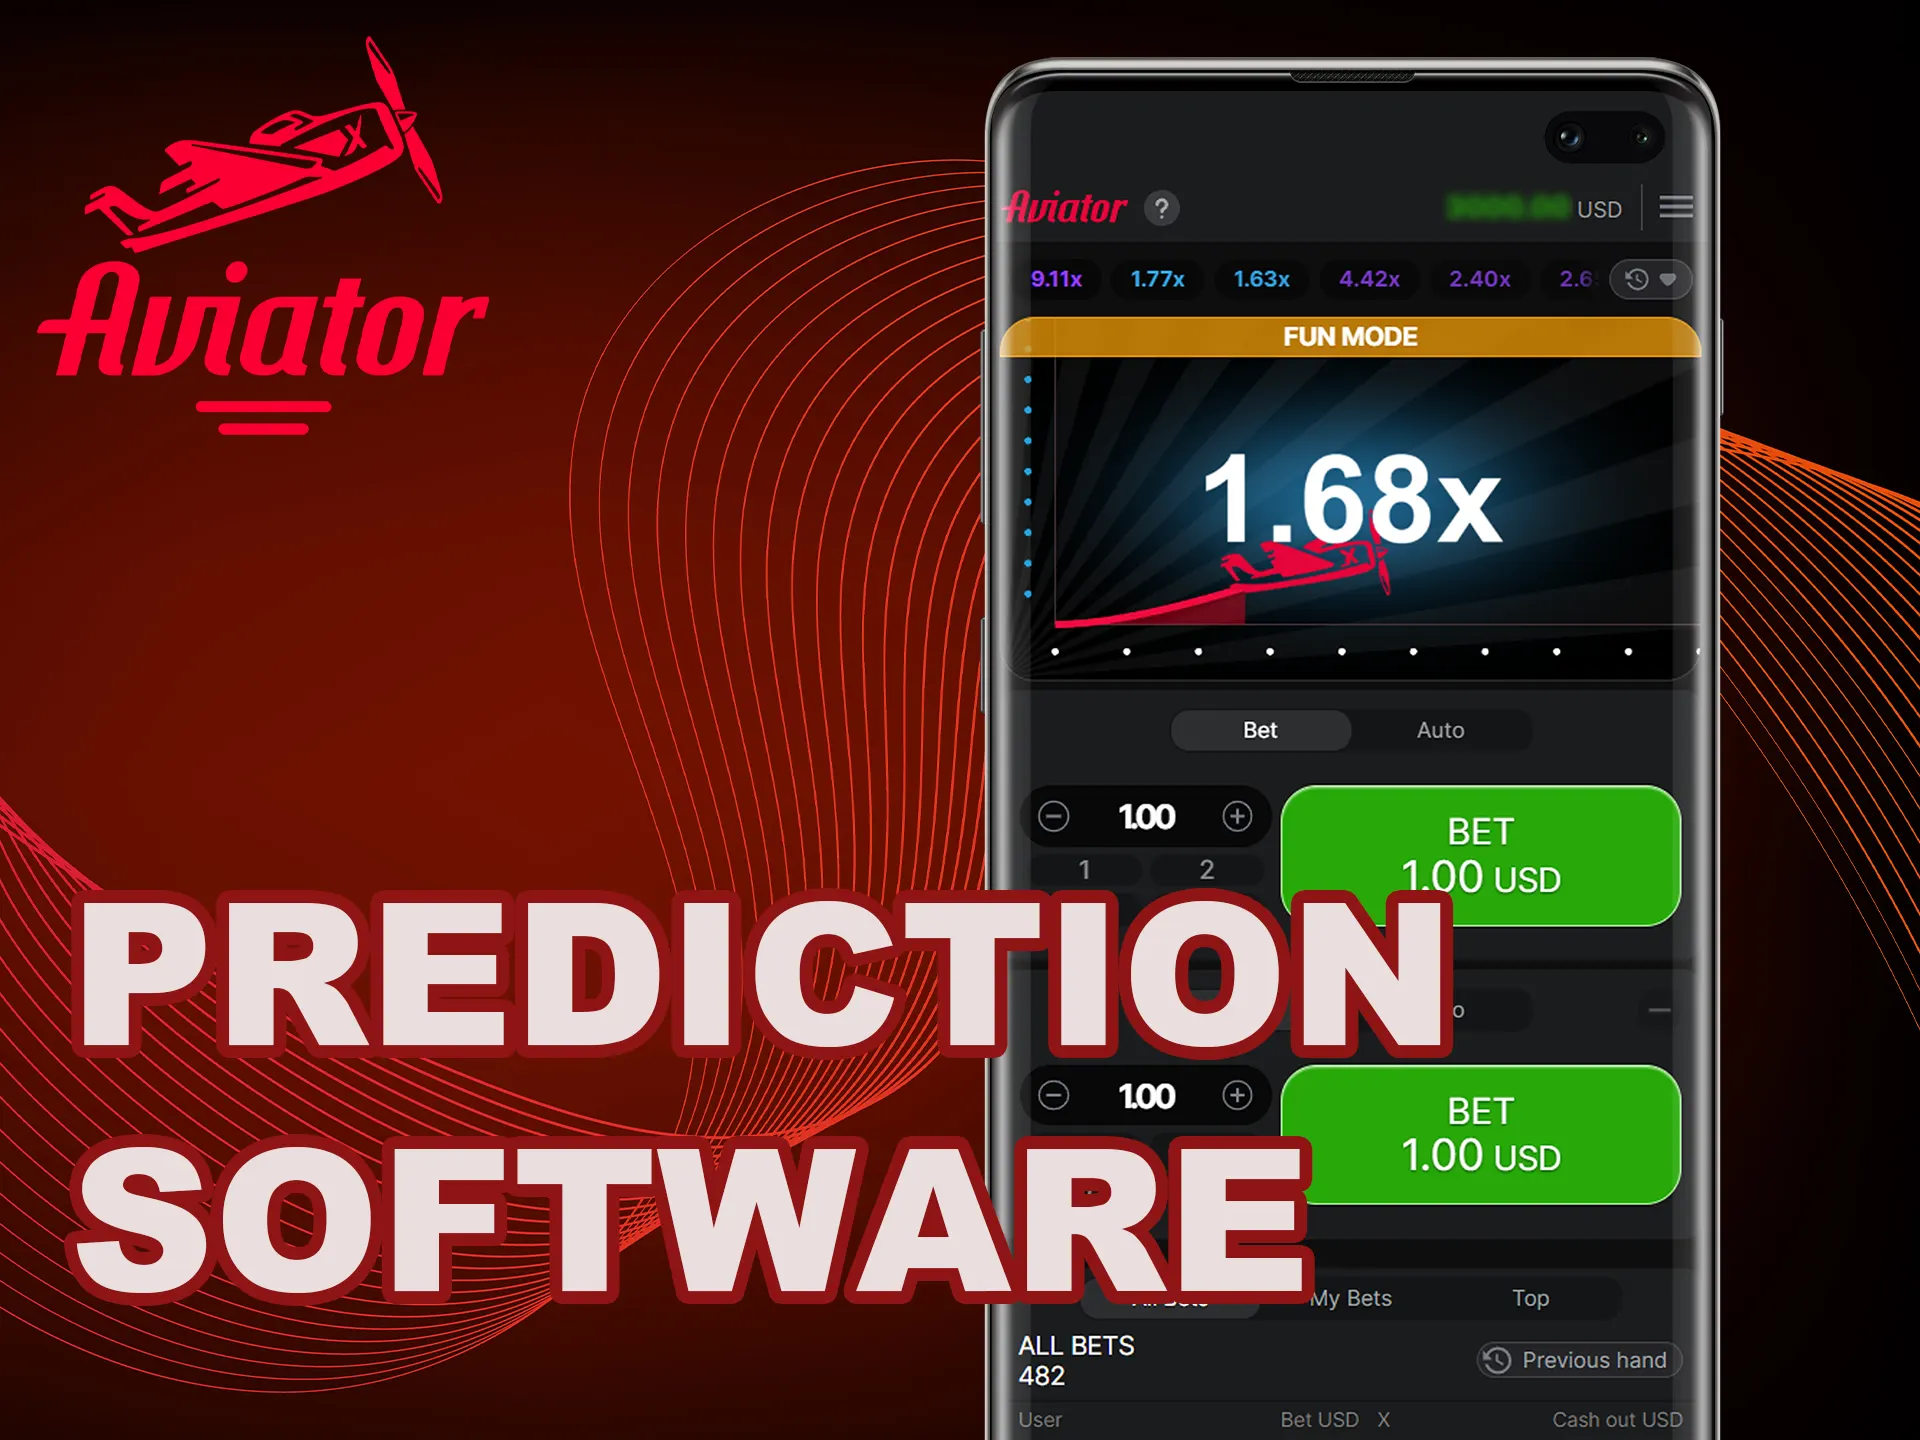 Let's learn more about Aviator Prediction software.